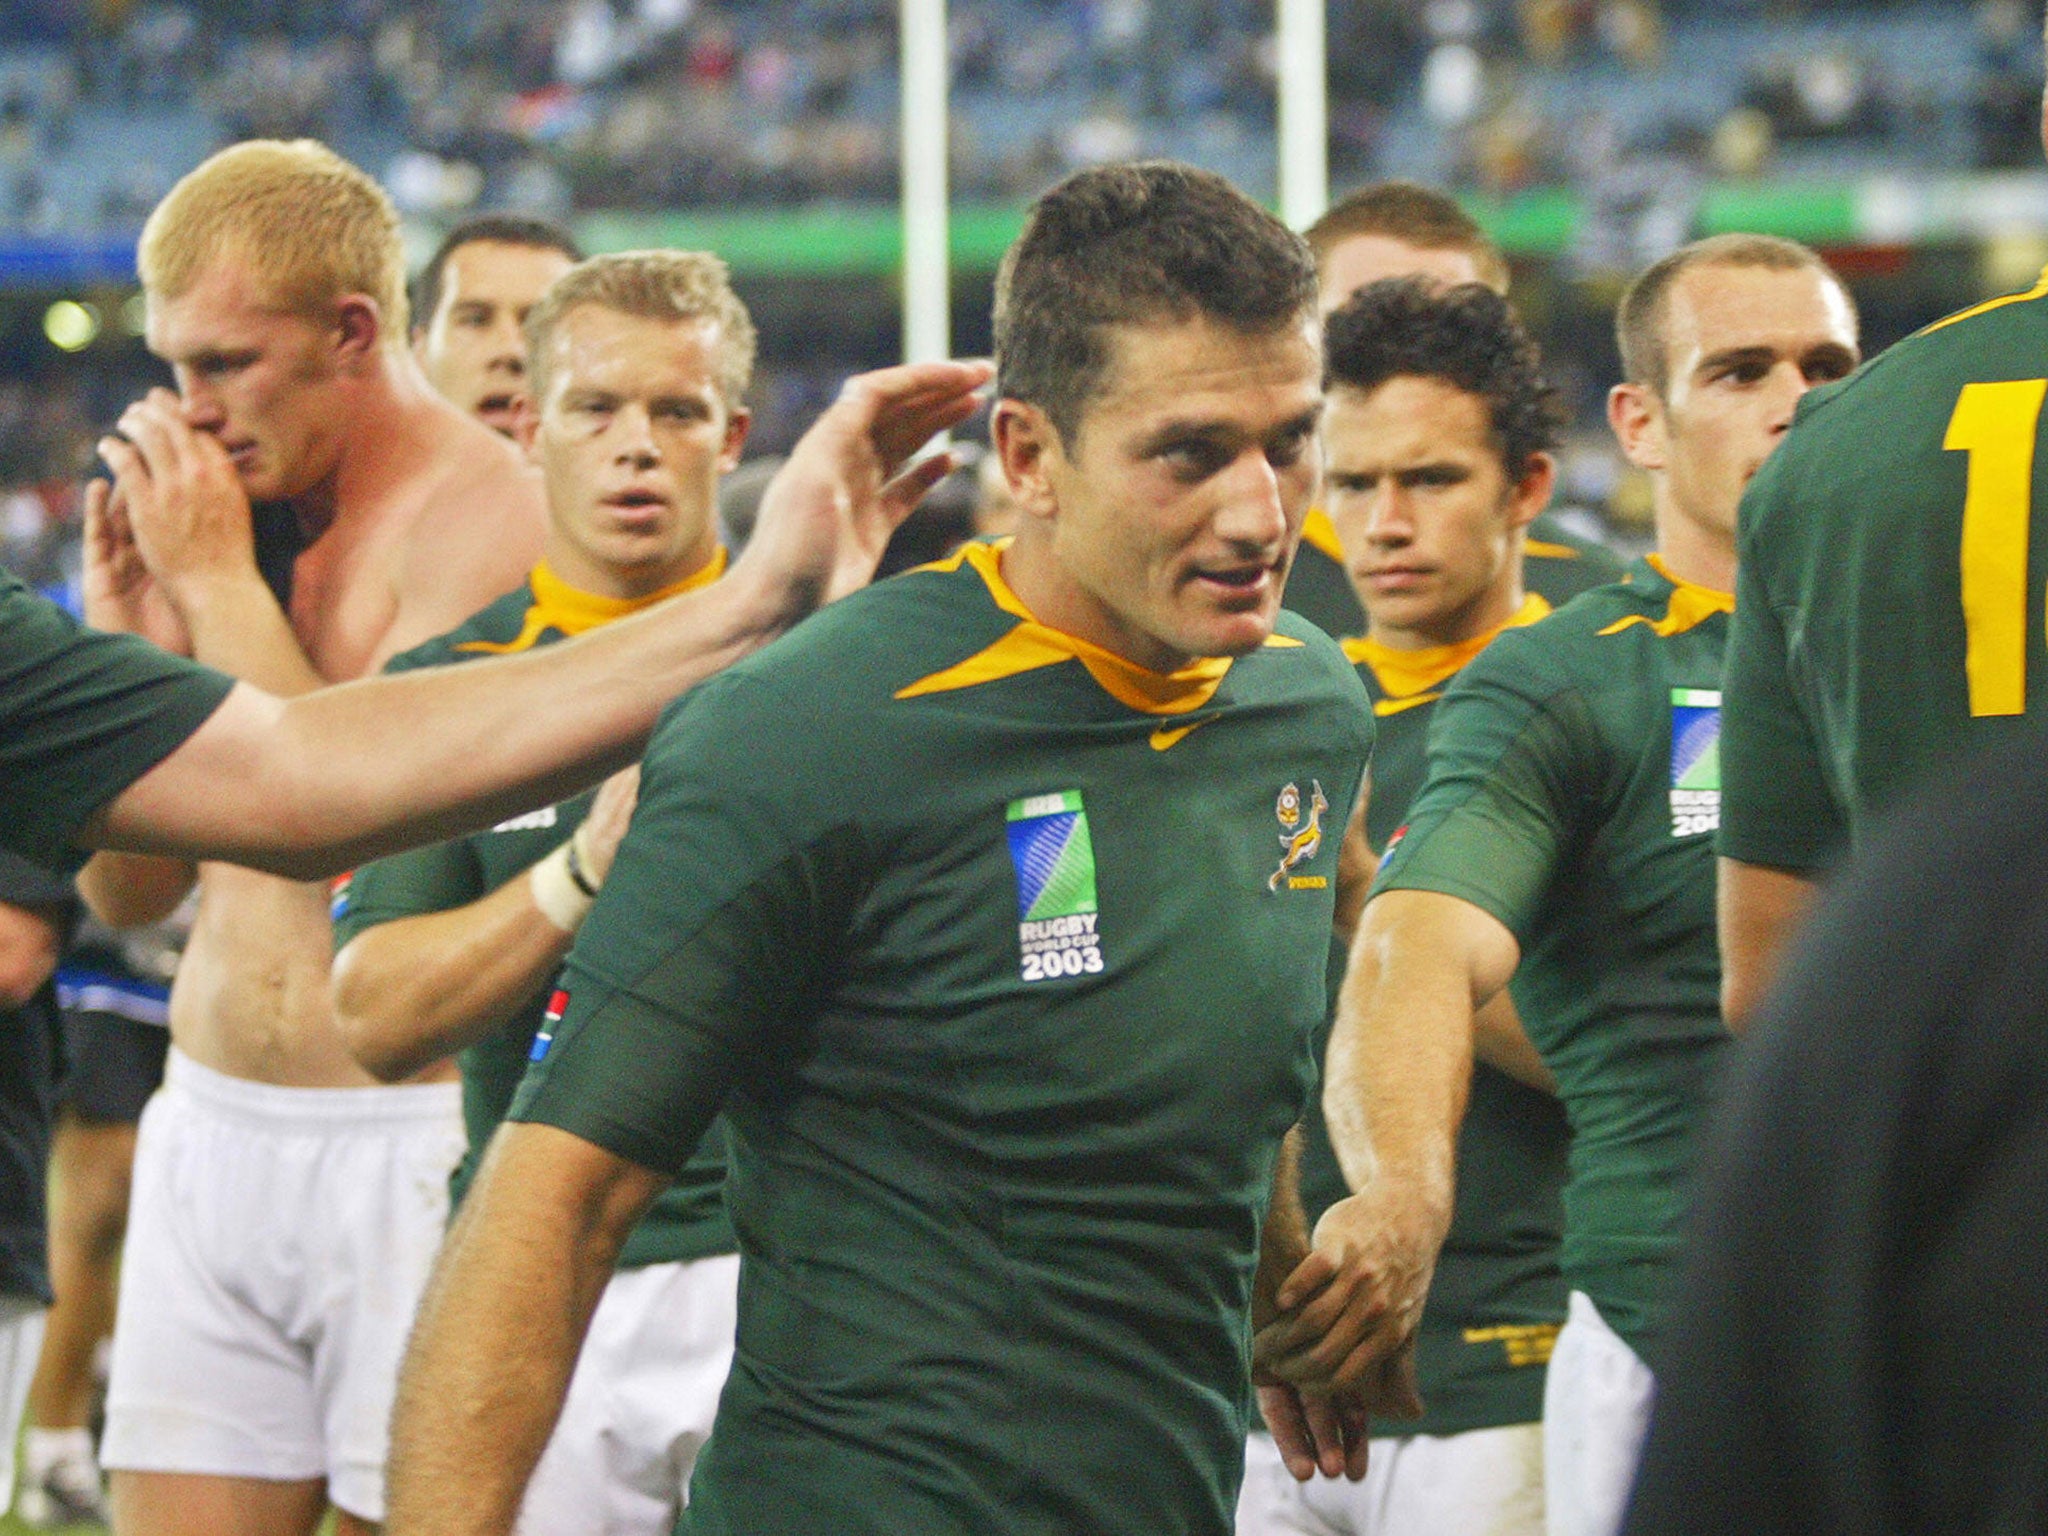 Joost van der Westhuizen retired in 2003 after making a record 89th appearance